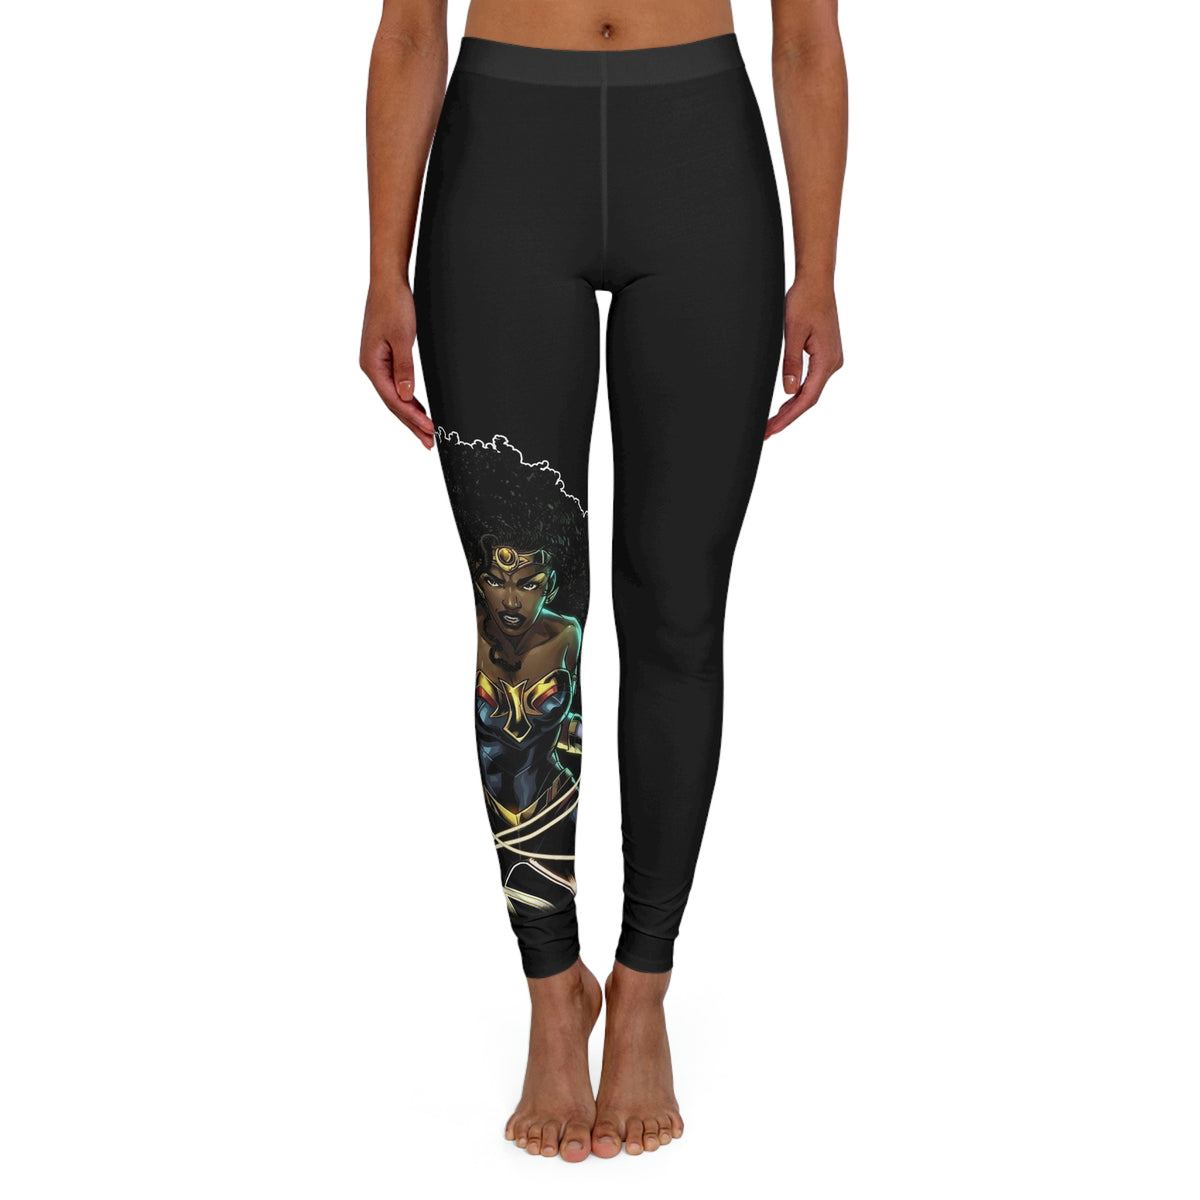 Buy Official Wonder Woman Gold Symbols and Flowers Leggings